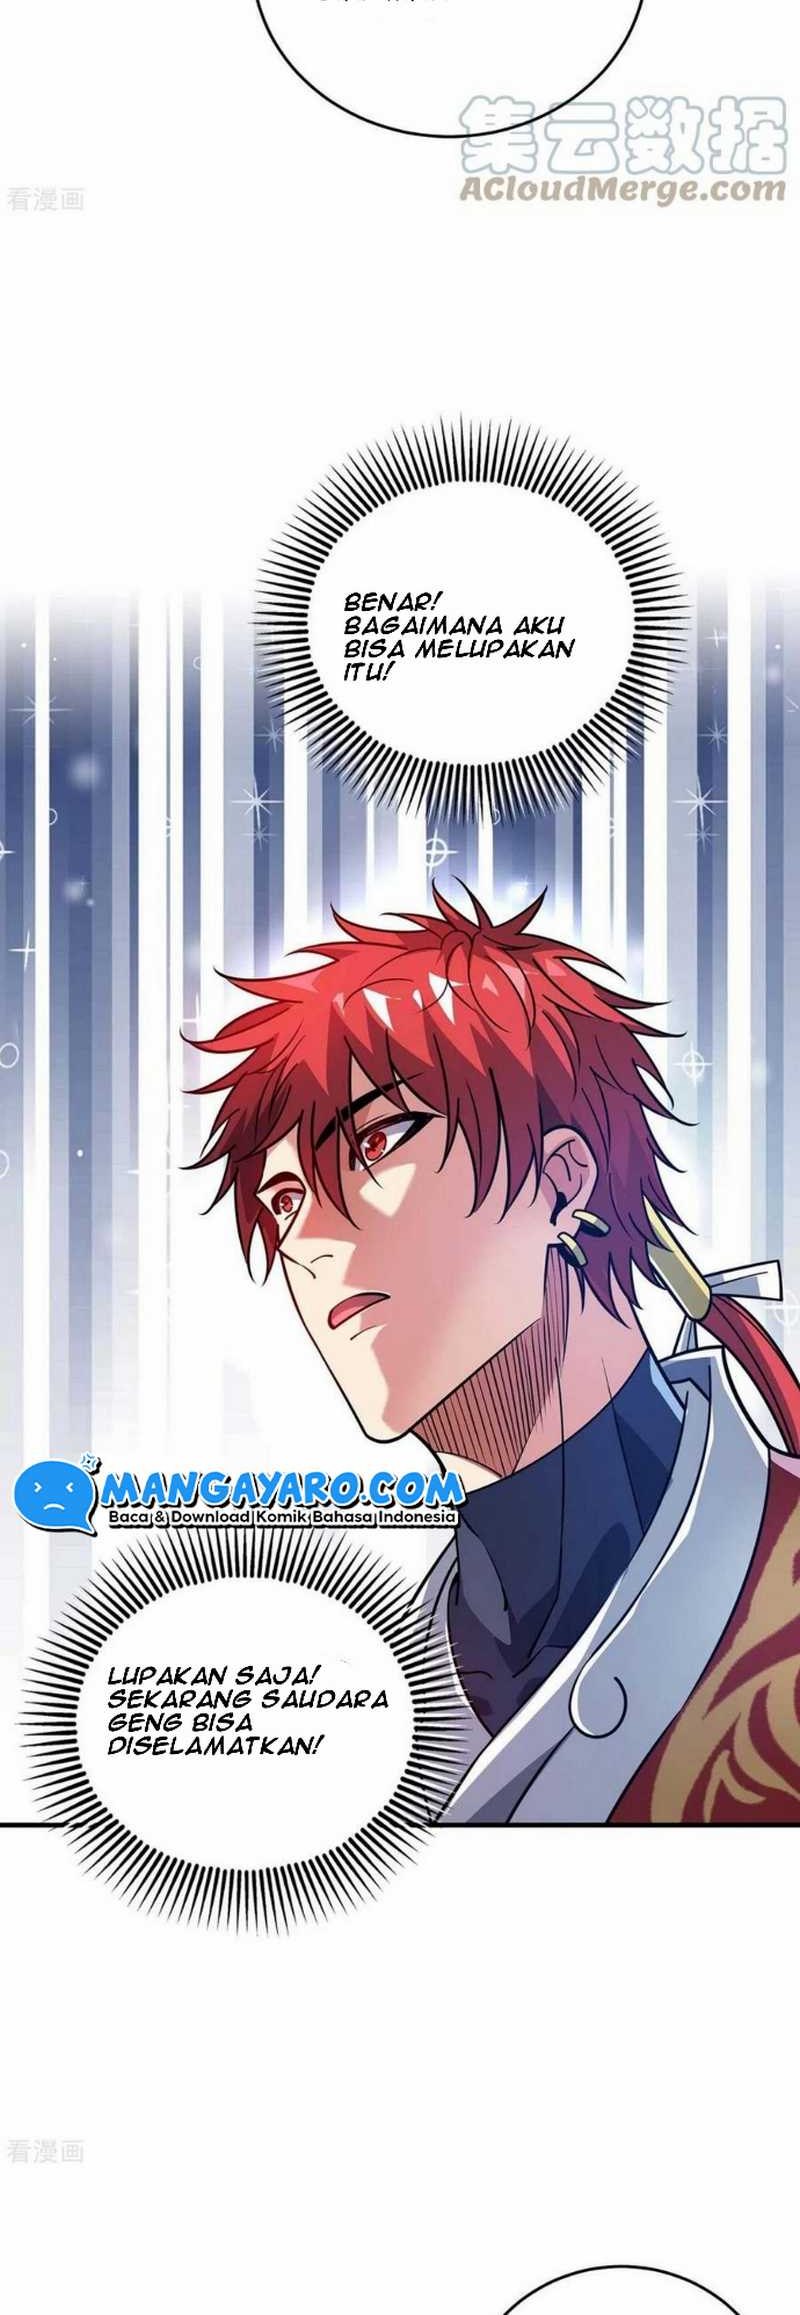 The First Son-In-Law Vanguard of All Time Chapter 157